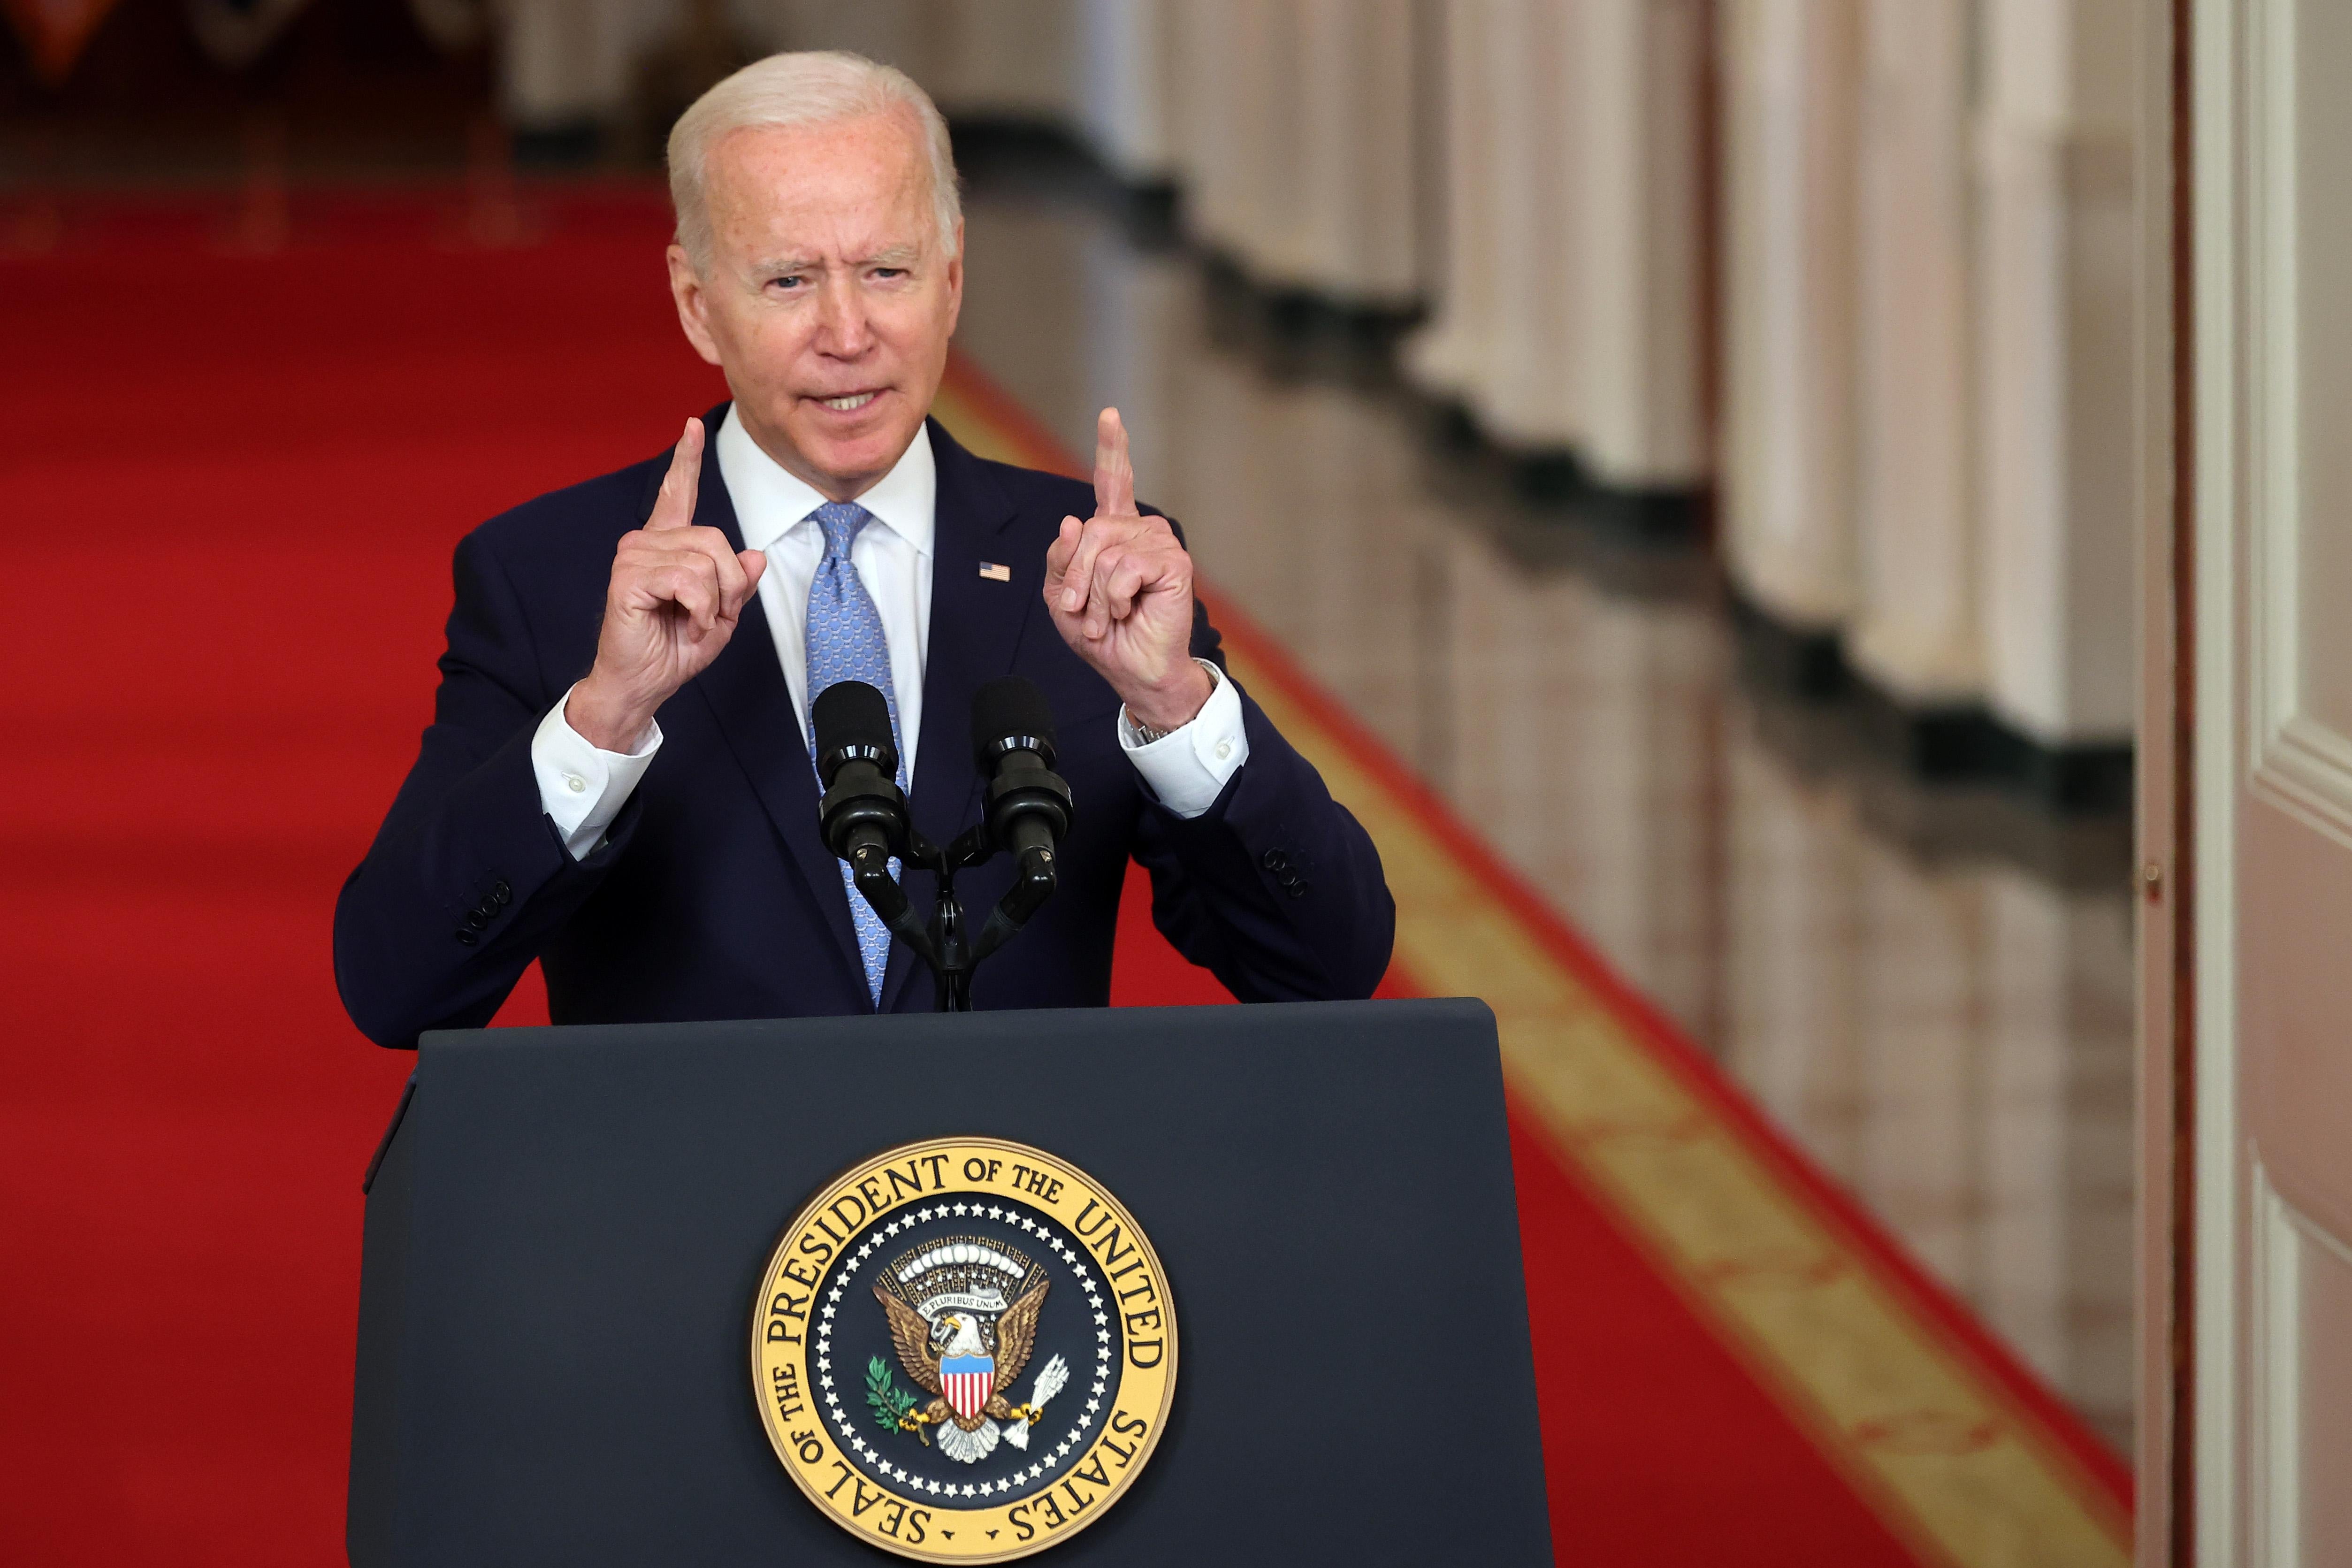 Biden standing behind a mic, pointing up